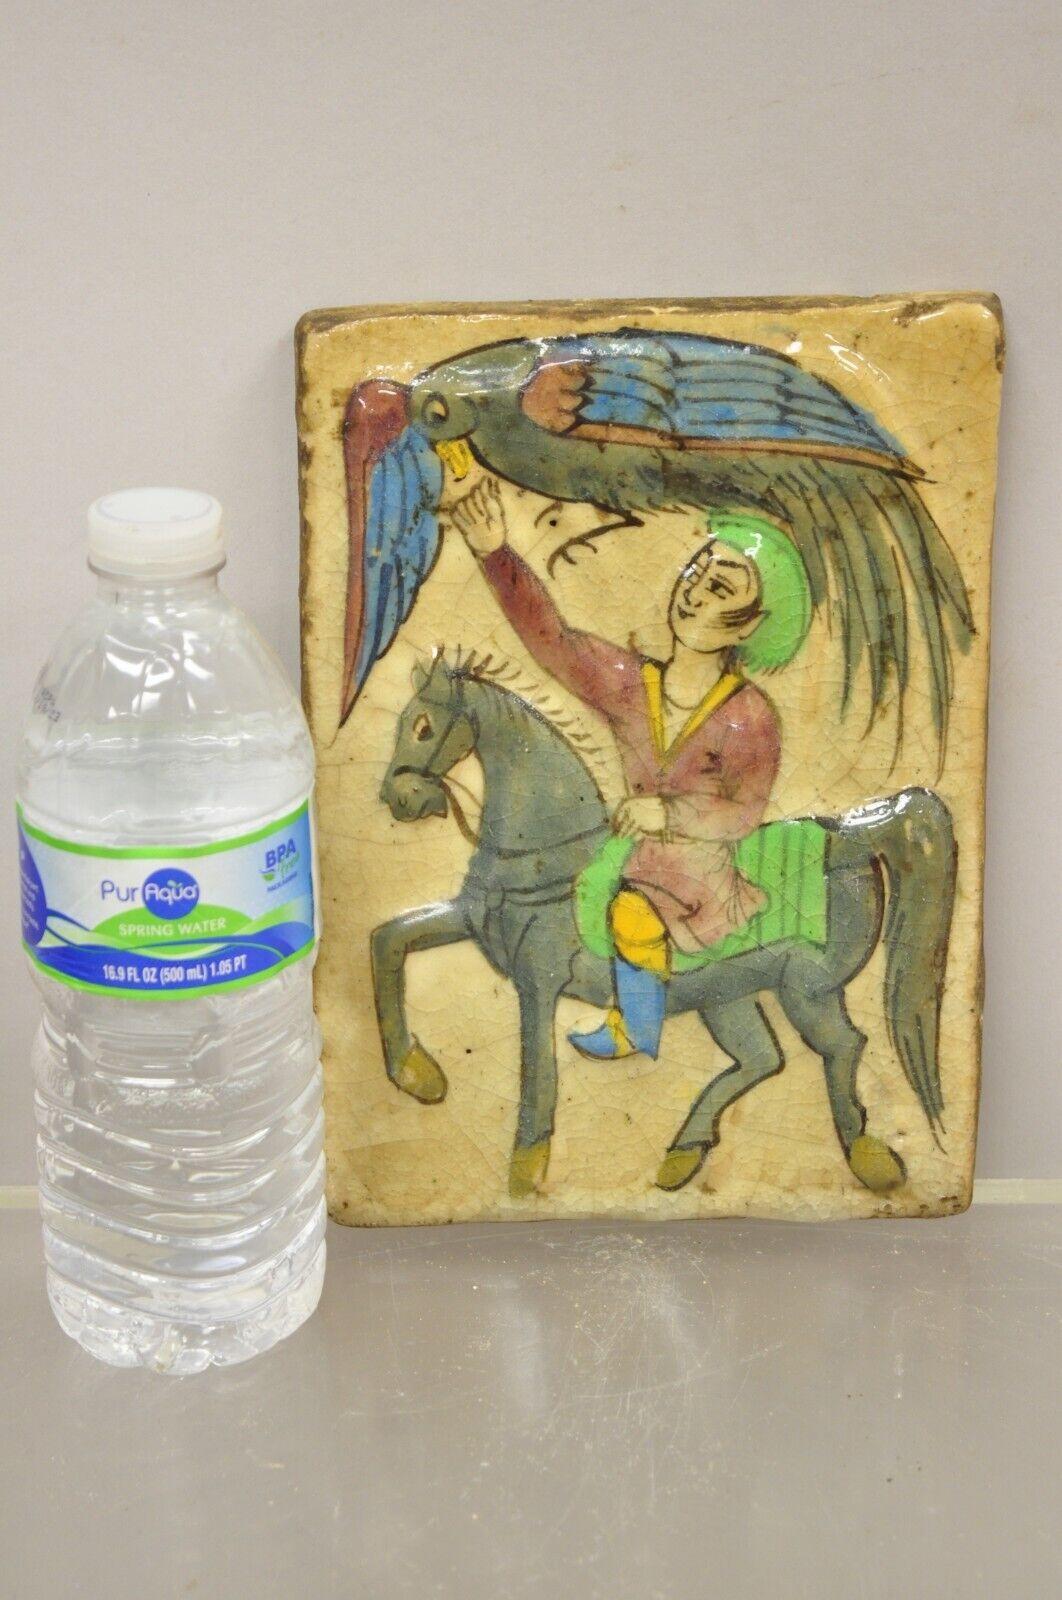 Antique Persian Iznik Qajar style ceramic pottery tile blue phoenix bird and horse rider C4 D. Item features Original crackle glazed finish, heavy ceramic pottery construction, very impressive detail, wonderful style and form. Great to mount as wall